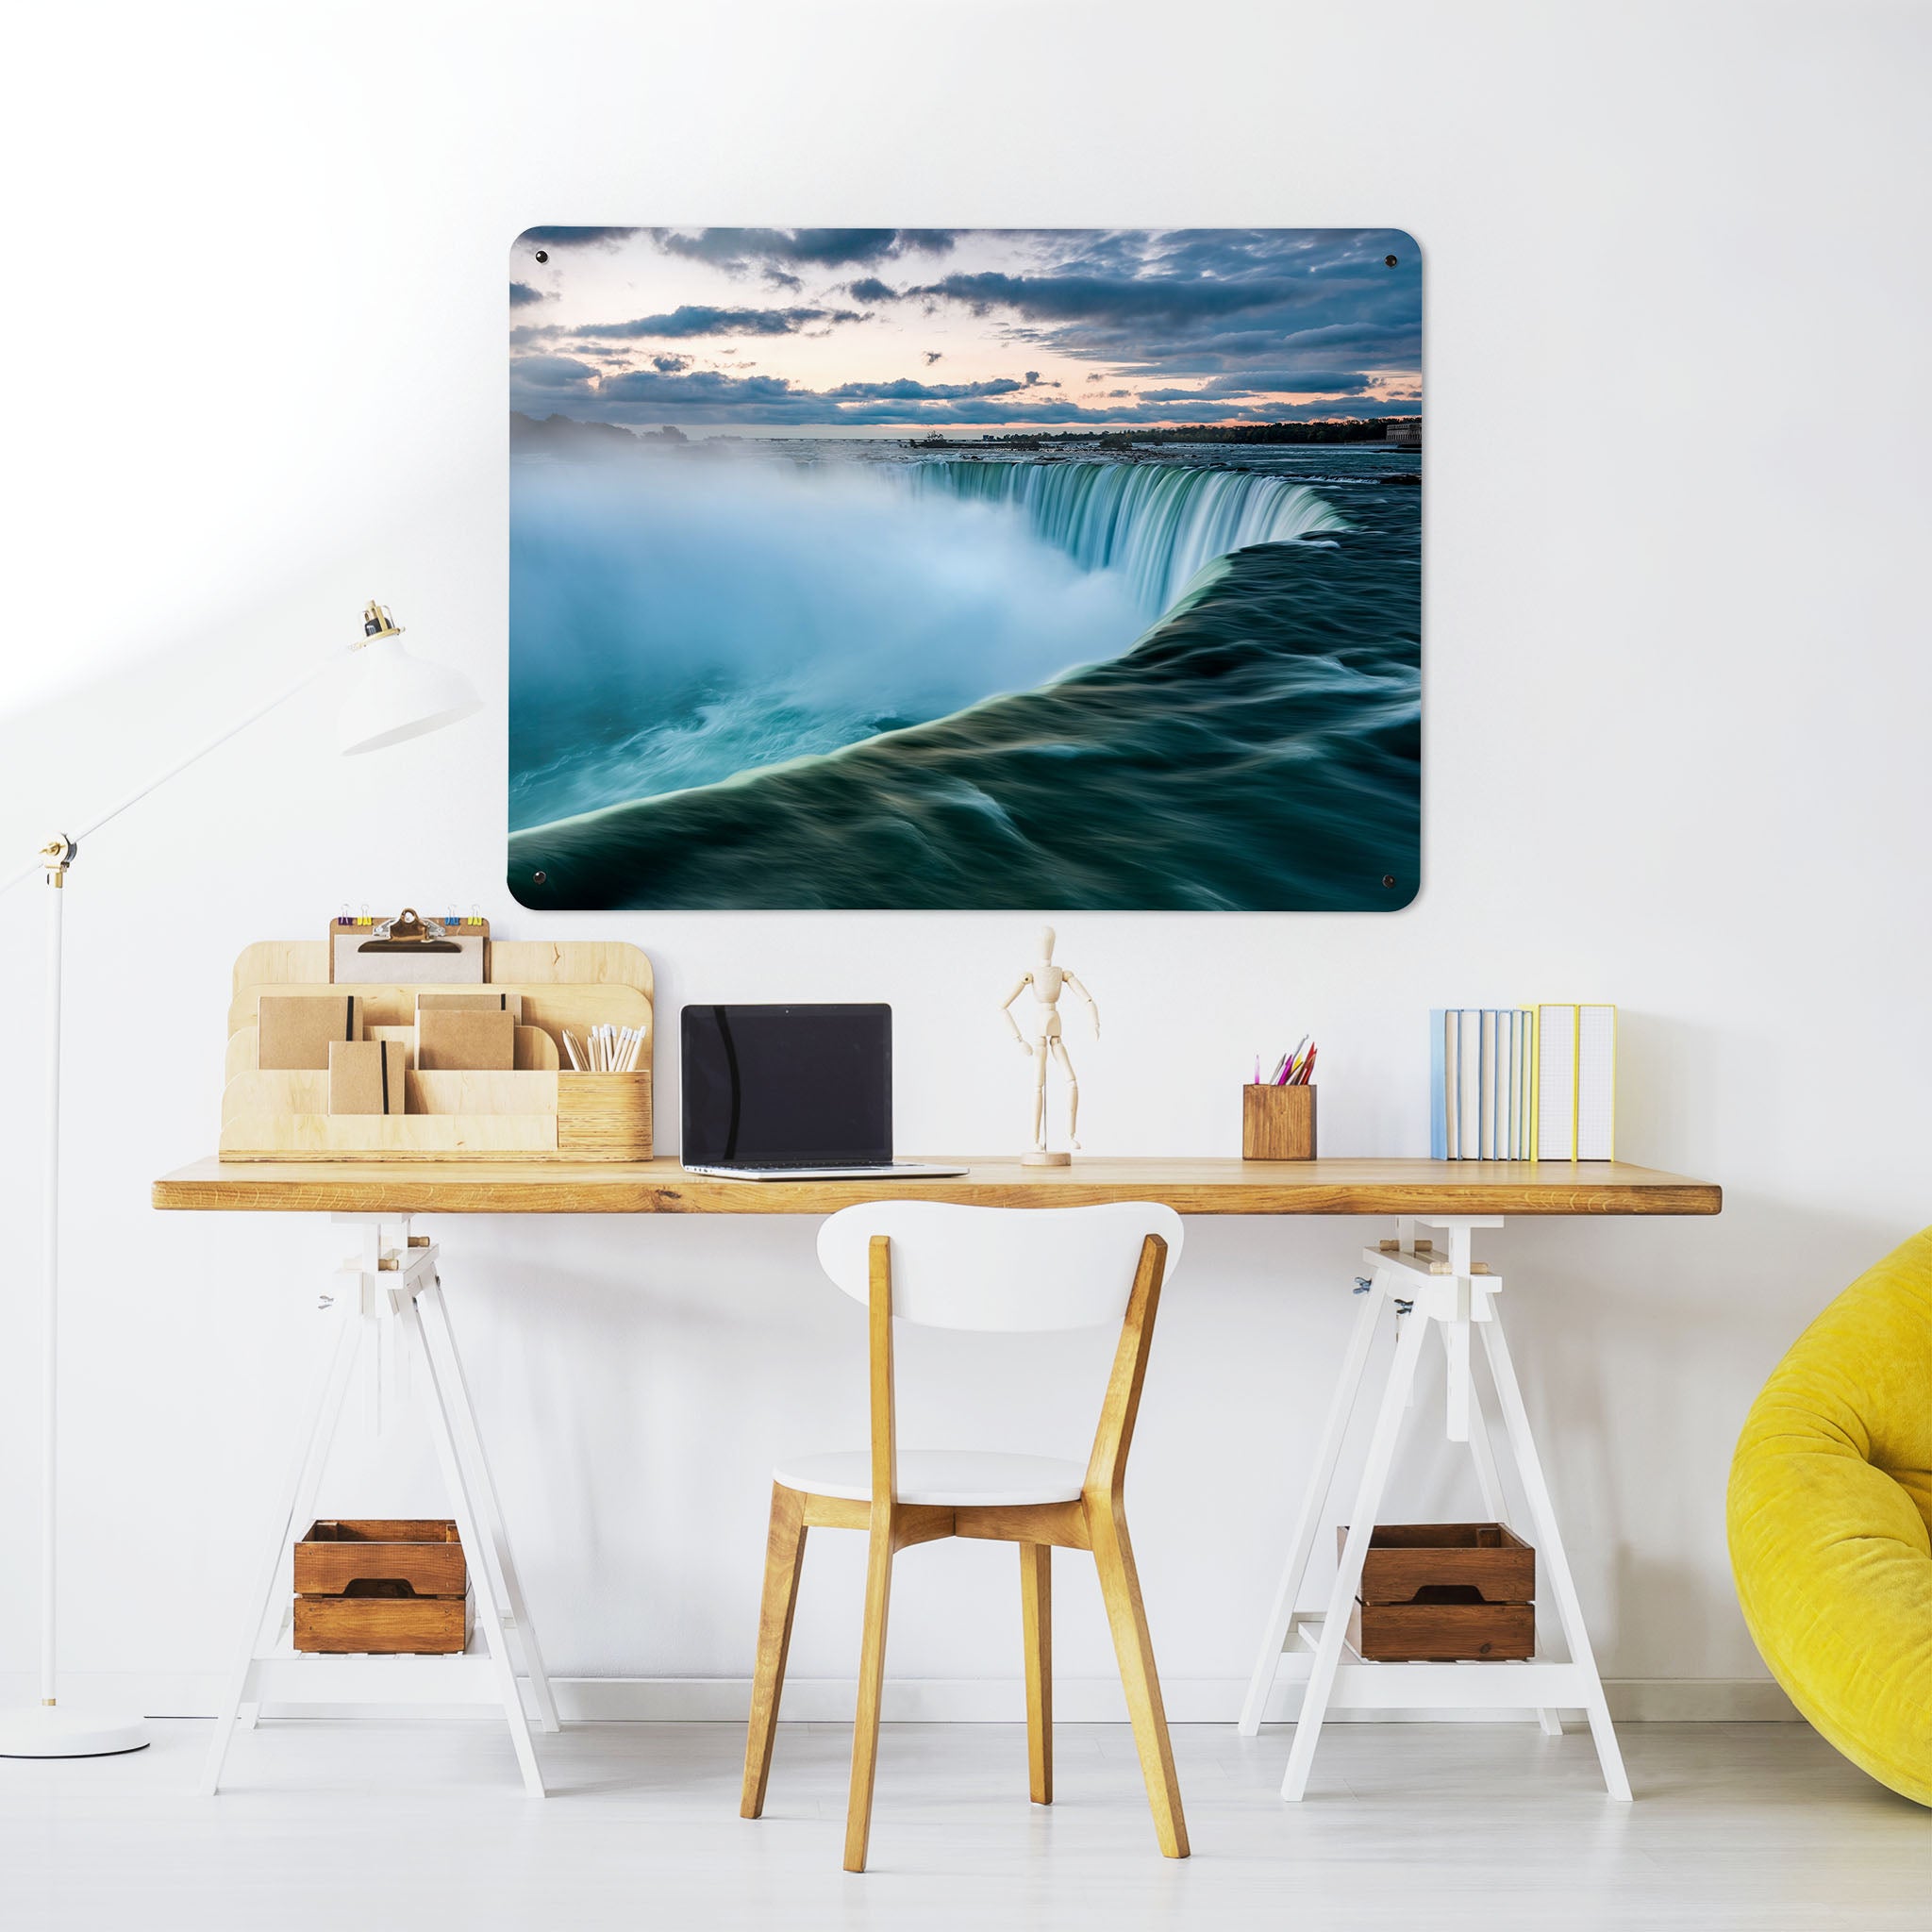 A desk in a workspace setting in a white interior with a magnetic metal wall art panel showing a photograph of the Niagara Falls